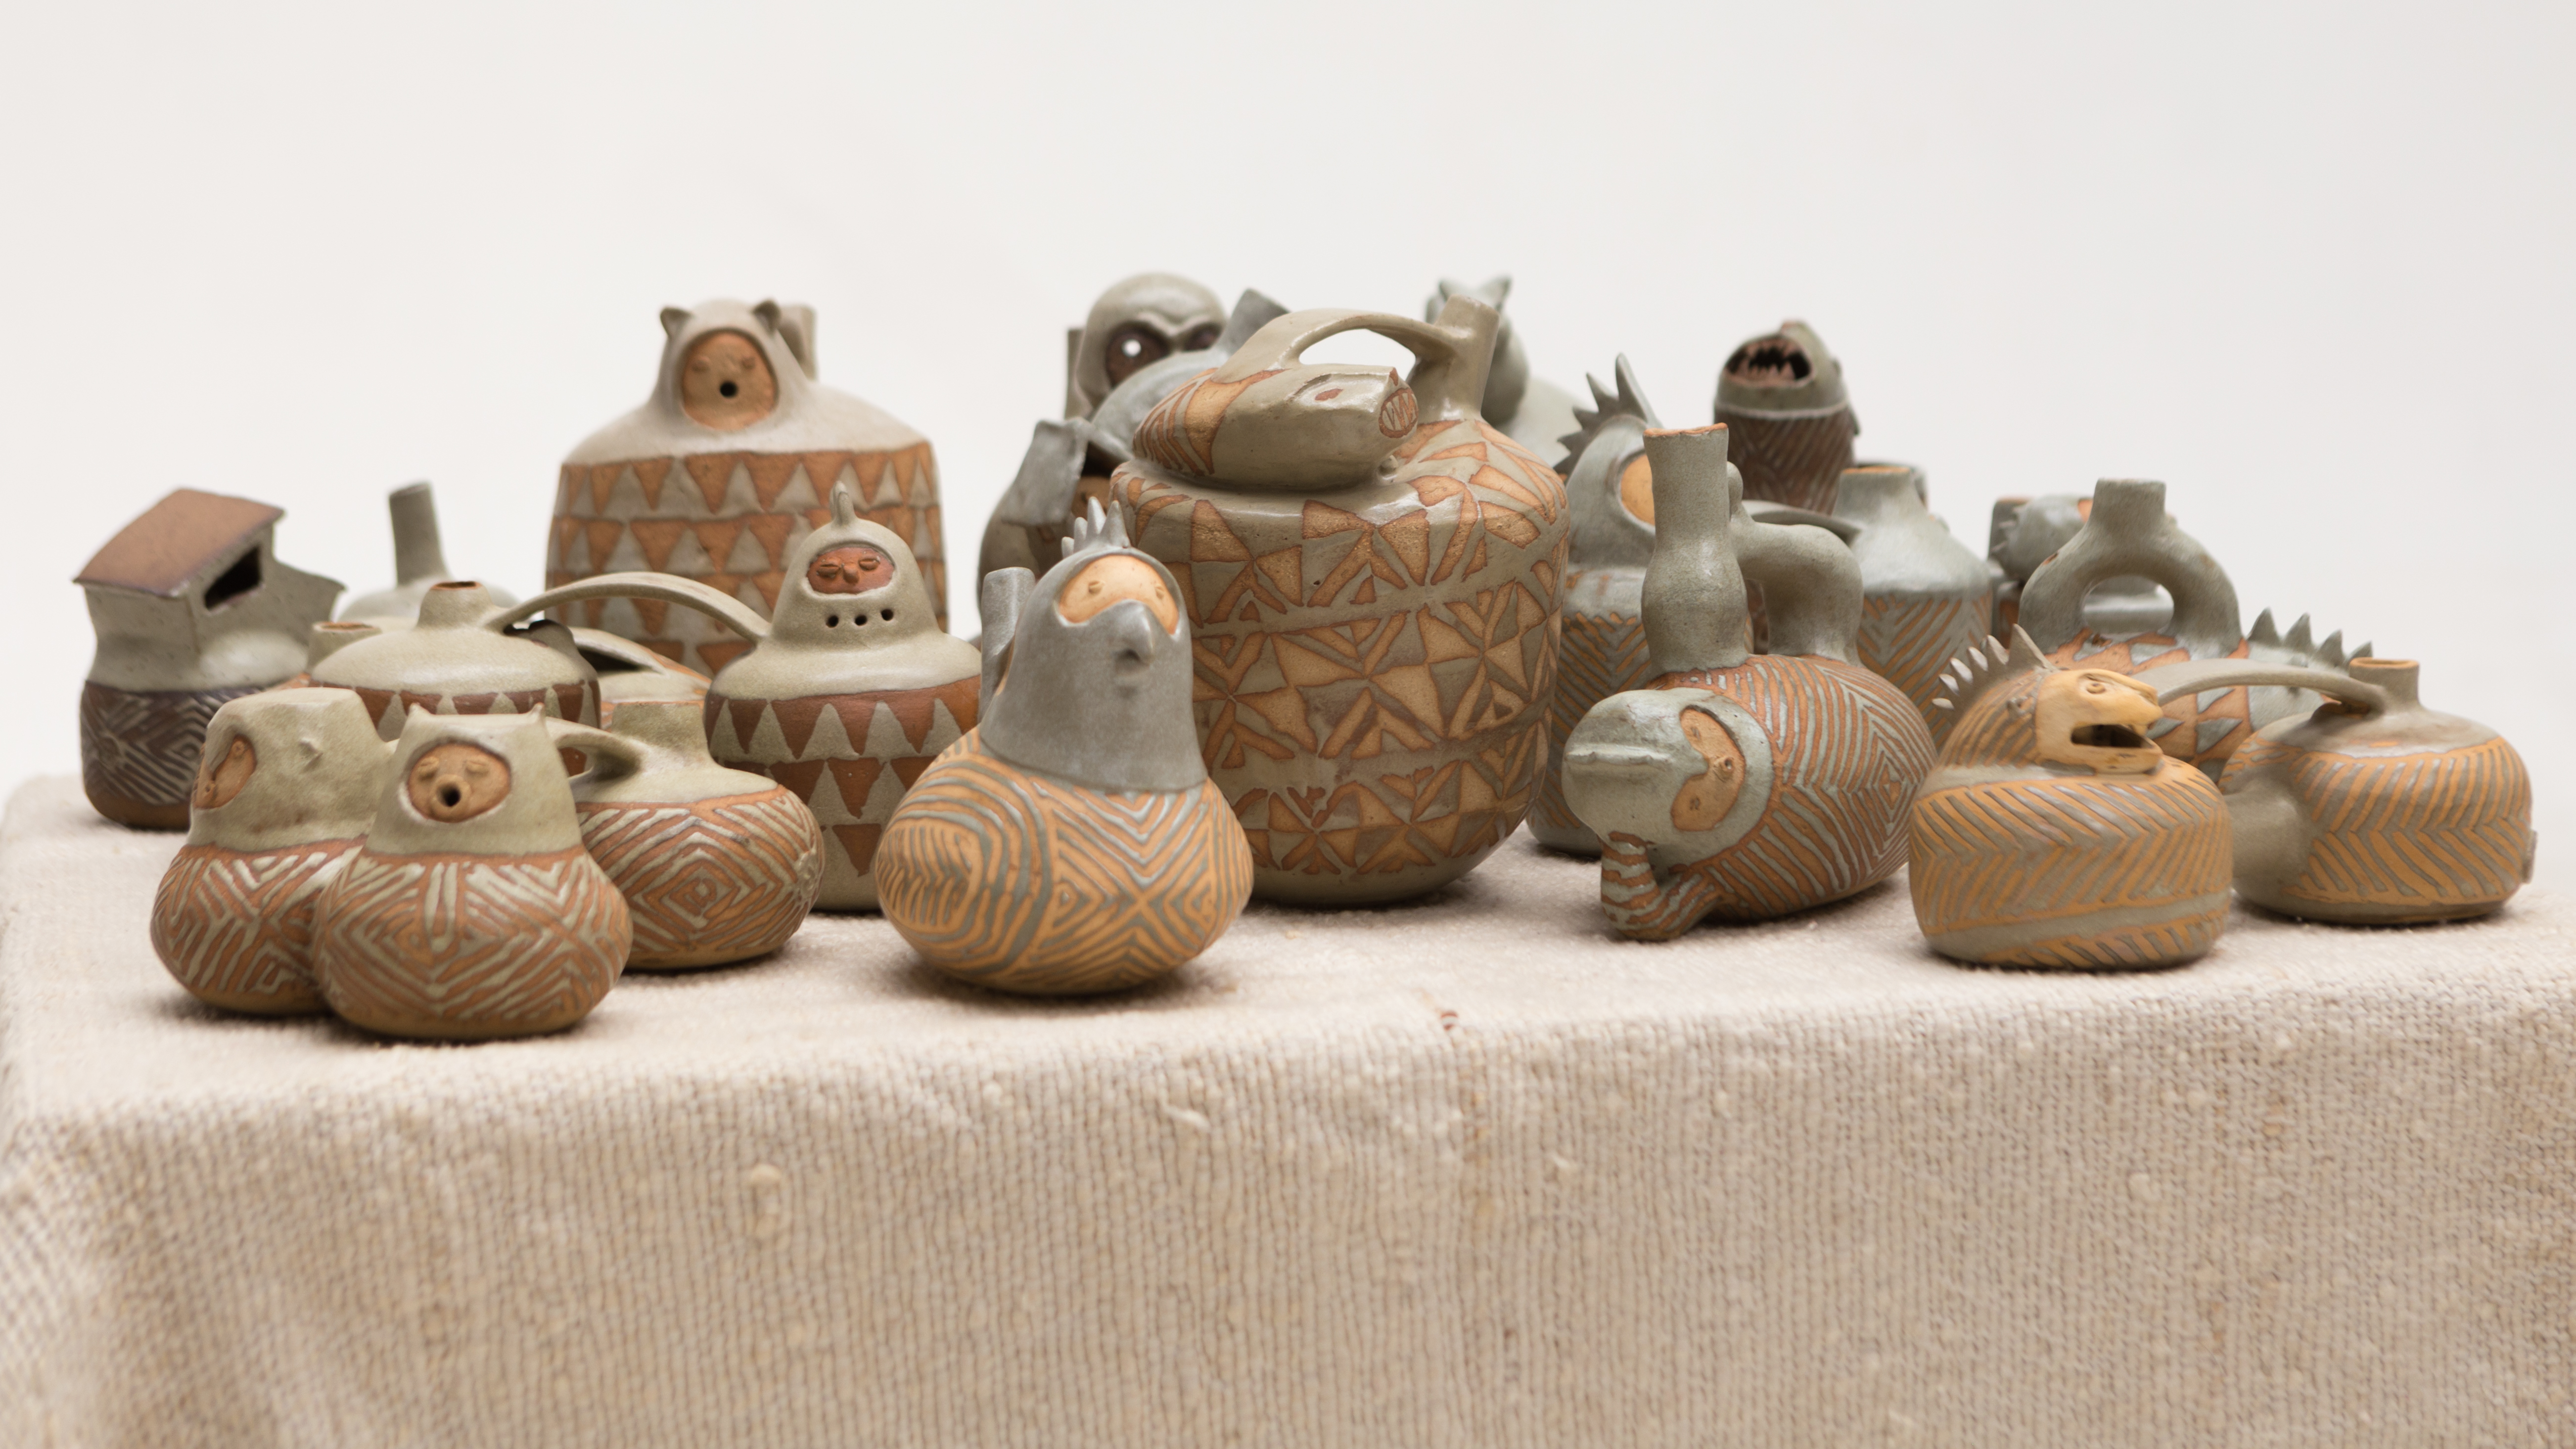 Masterclass with Francisca Gili / Creating pottery considering the Andean-Amazonian thought